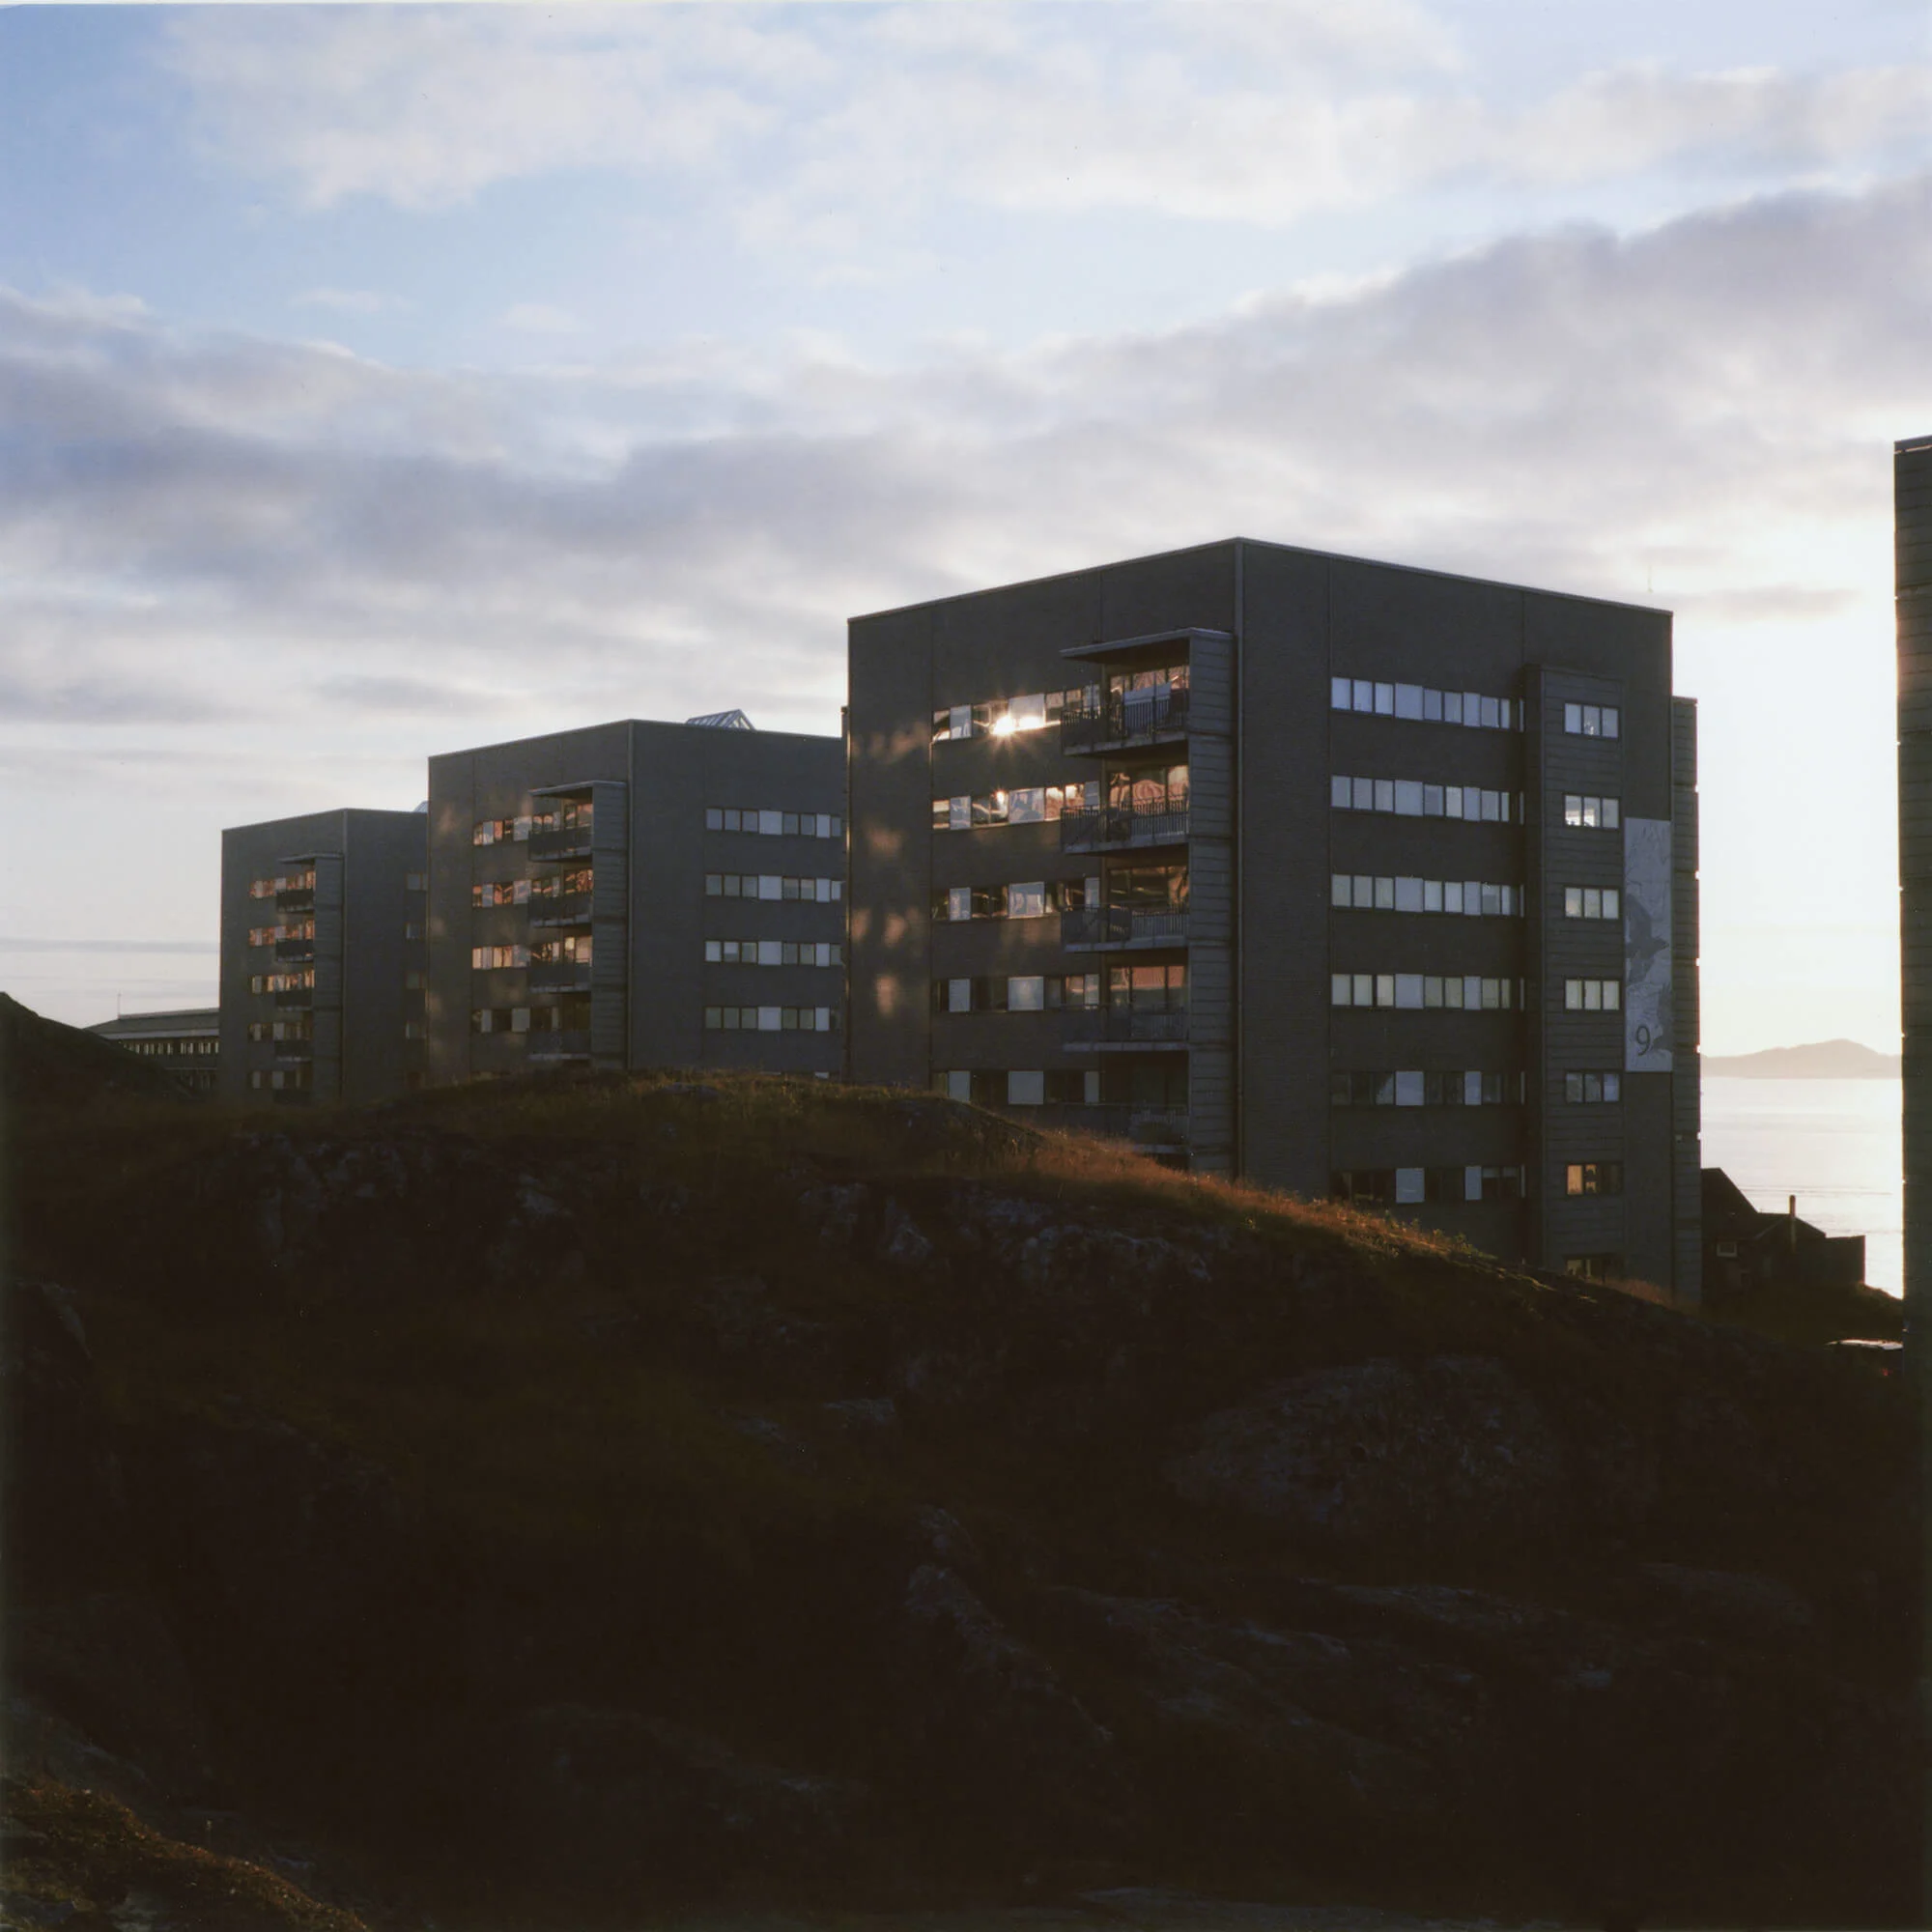 Examples of Nuuk’s modern architecture, taken by the sea at sunset. | At Tivoli Nuuk, a funfair in the center of town.